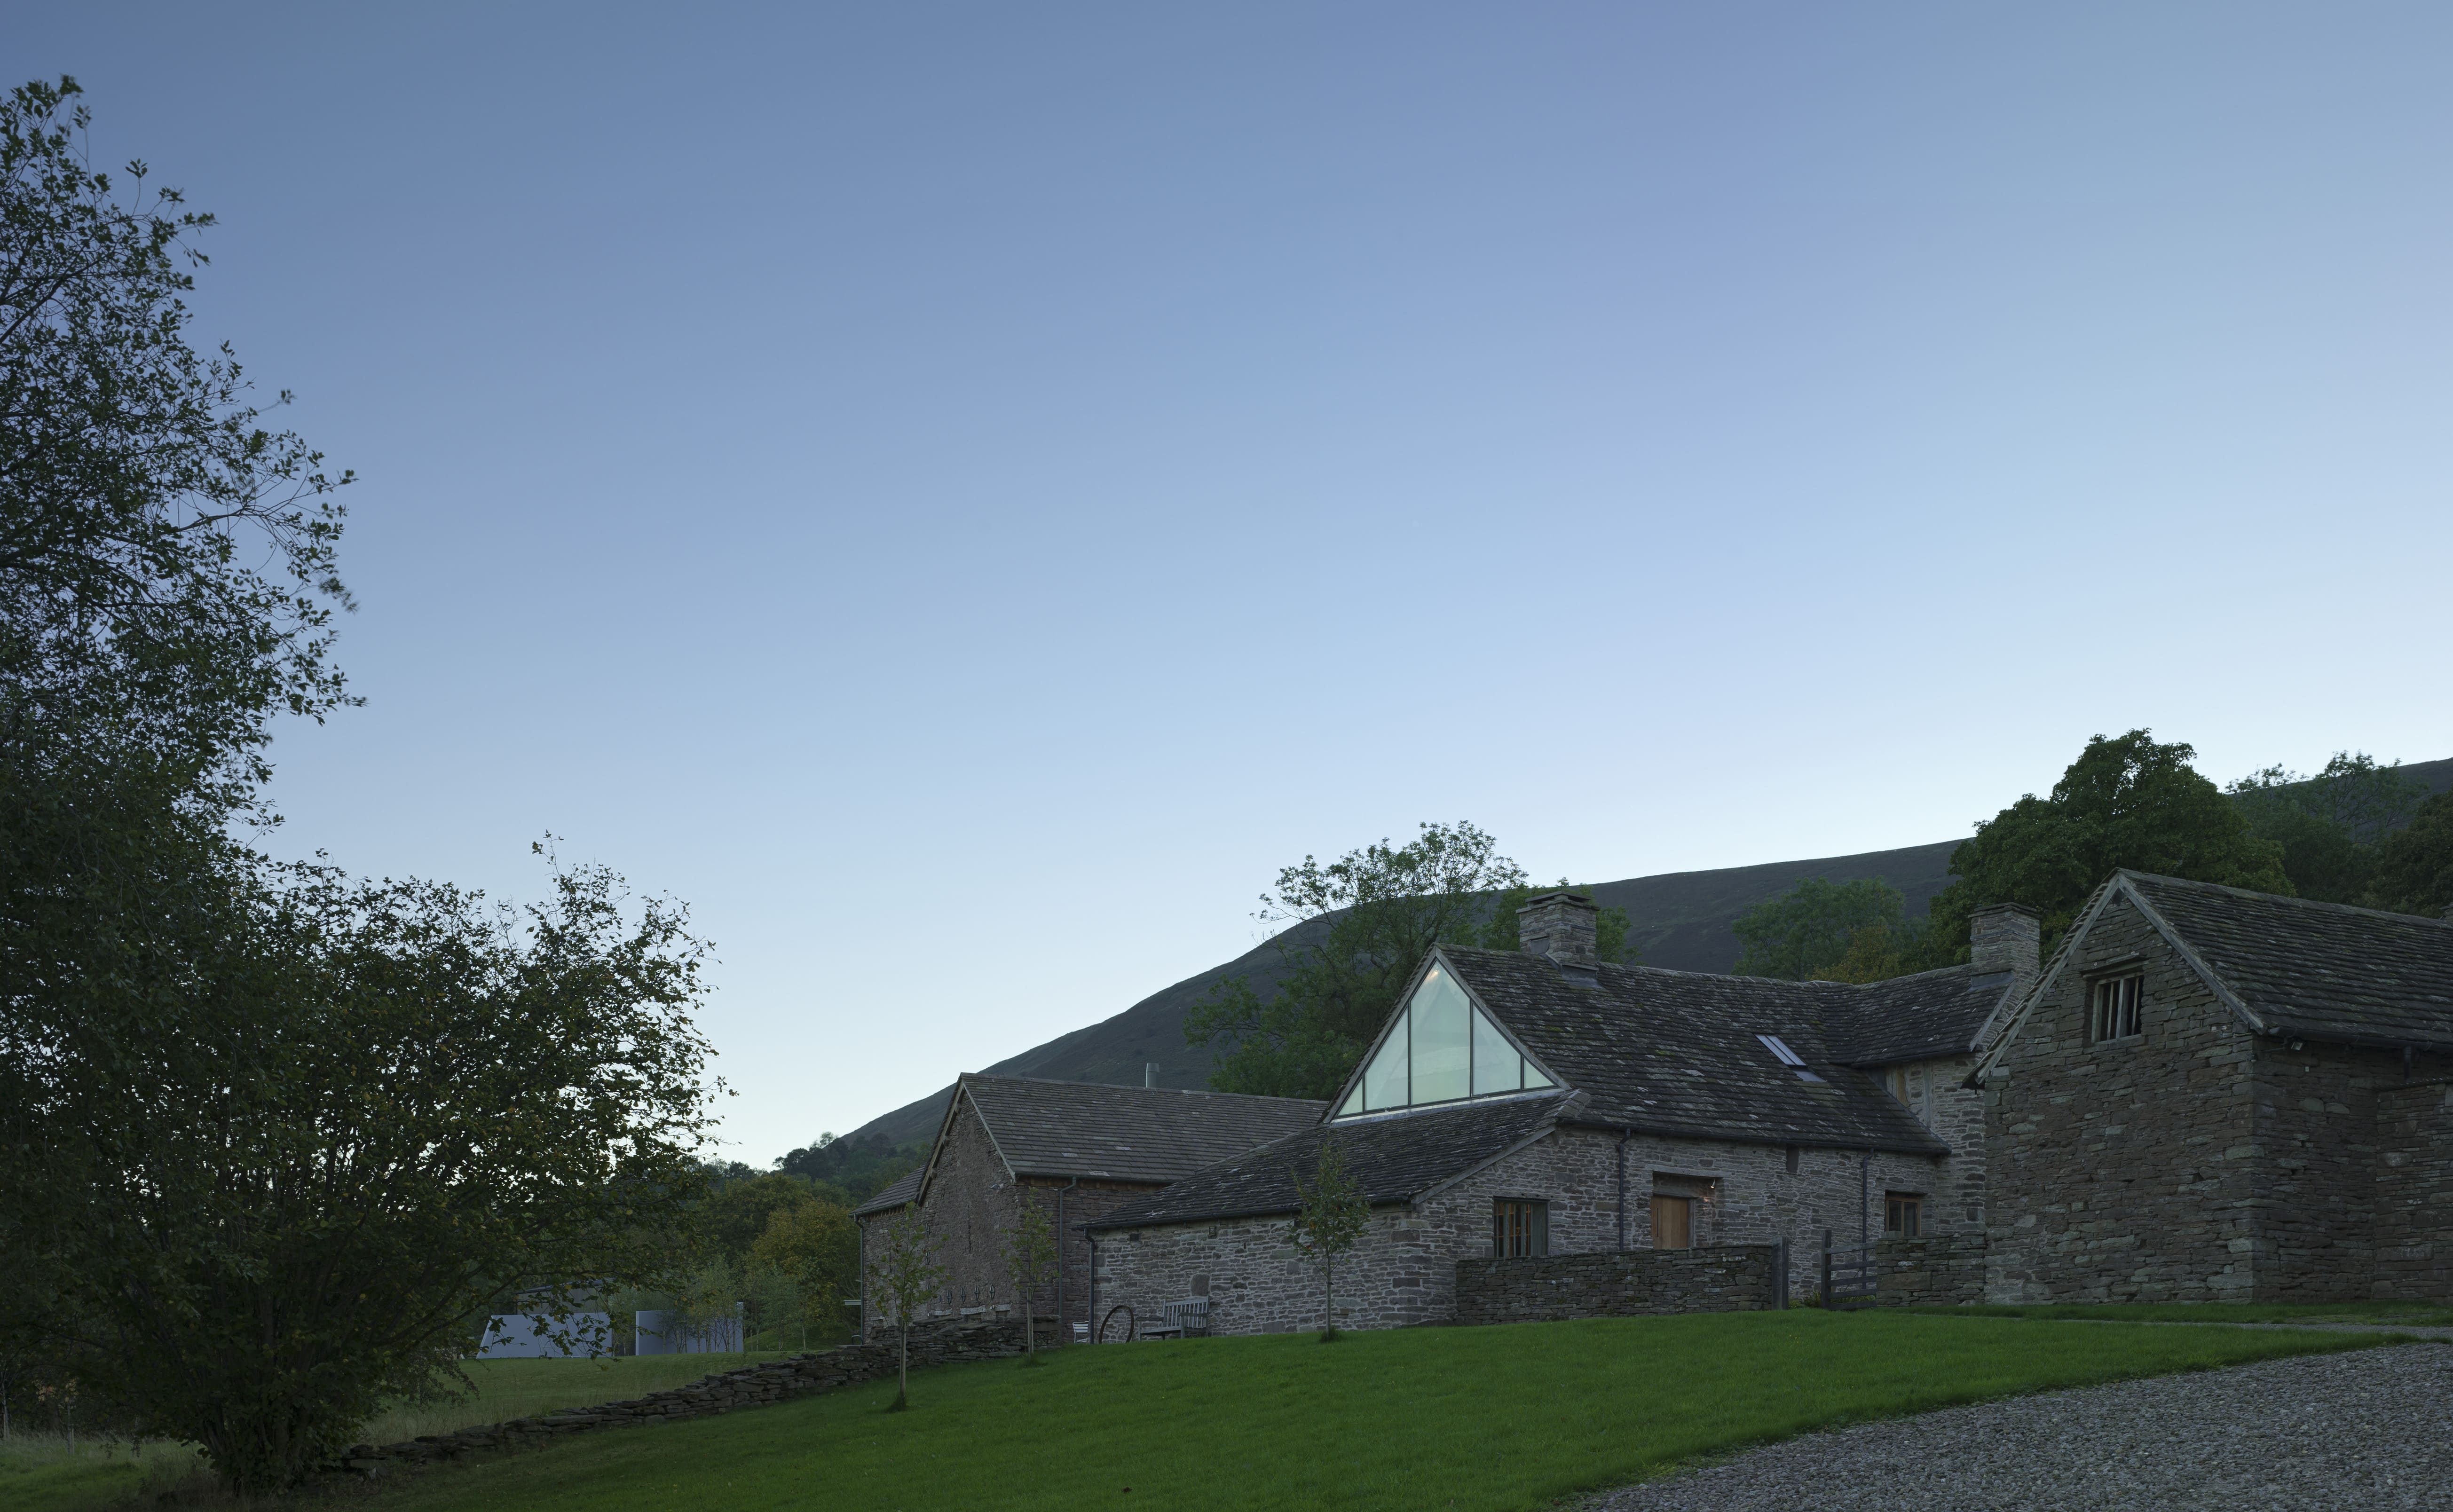 conversion of a 14th century farm house. A low stone building set in the hills. 